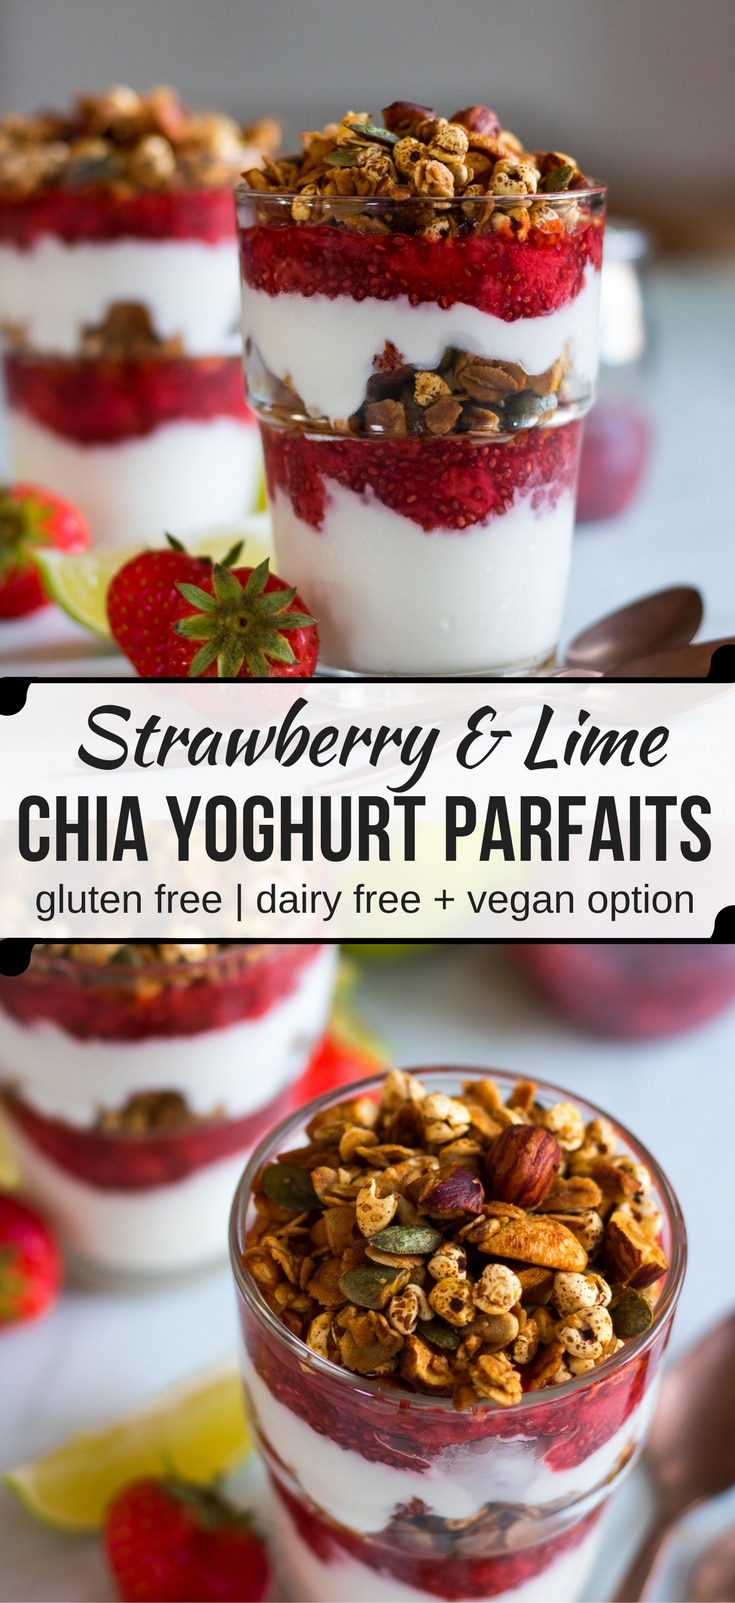 Strawberry Lime Chia Yoghurt Parfaits make a beautiful but simple breakfast, snack or even a healthy dessert! They're perfect to meal prep and can be made gluten free and dairy free too. #glutenfree #yoghurtparfait